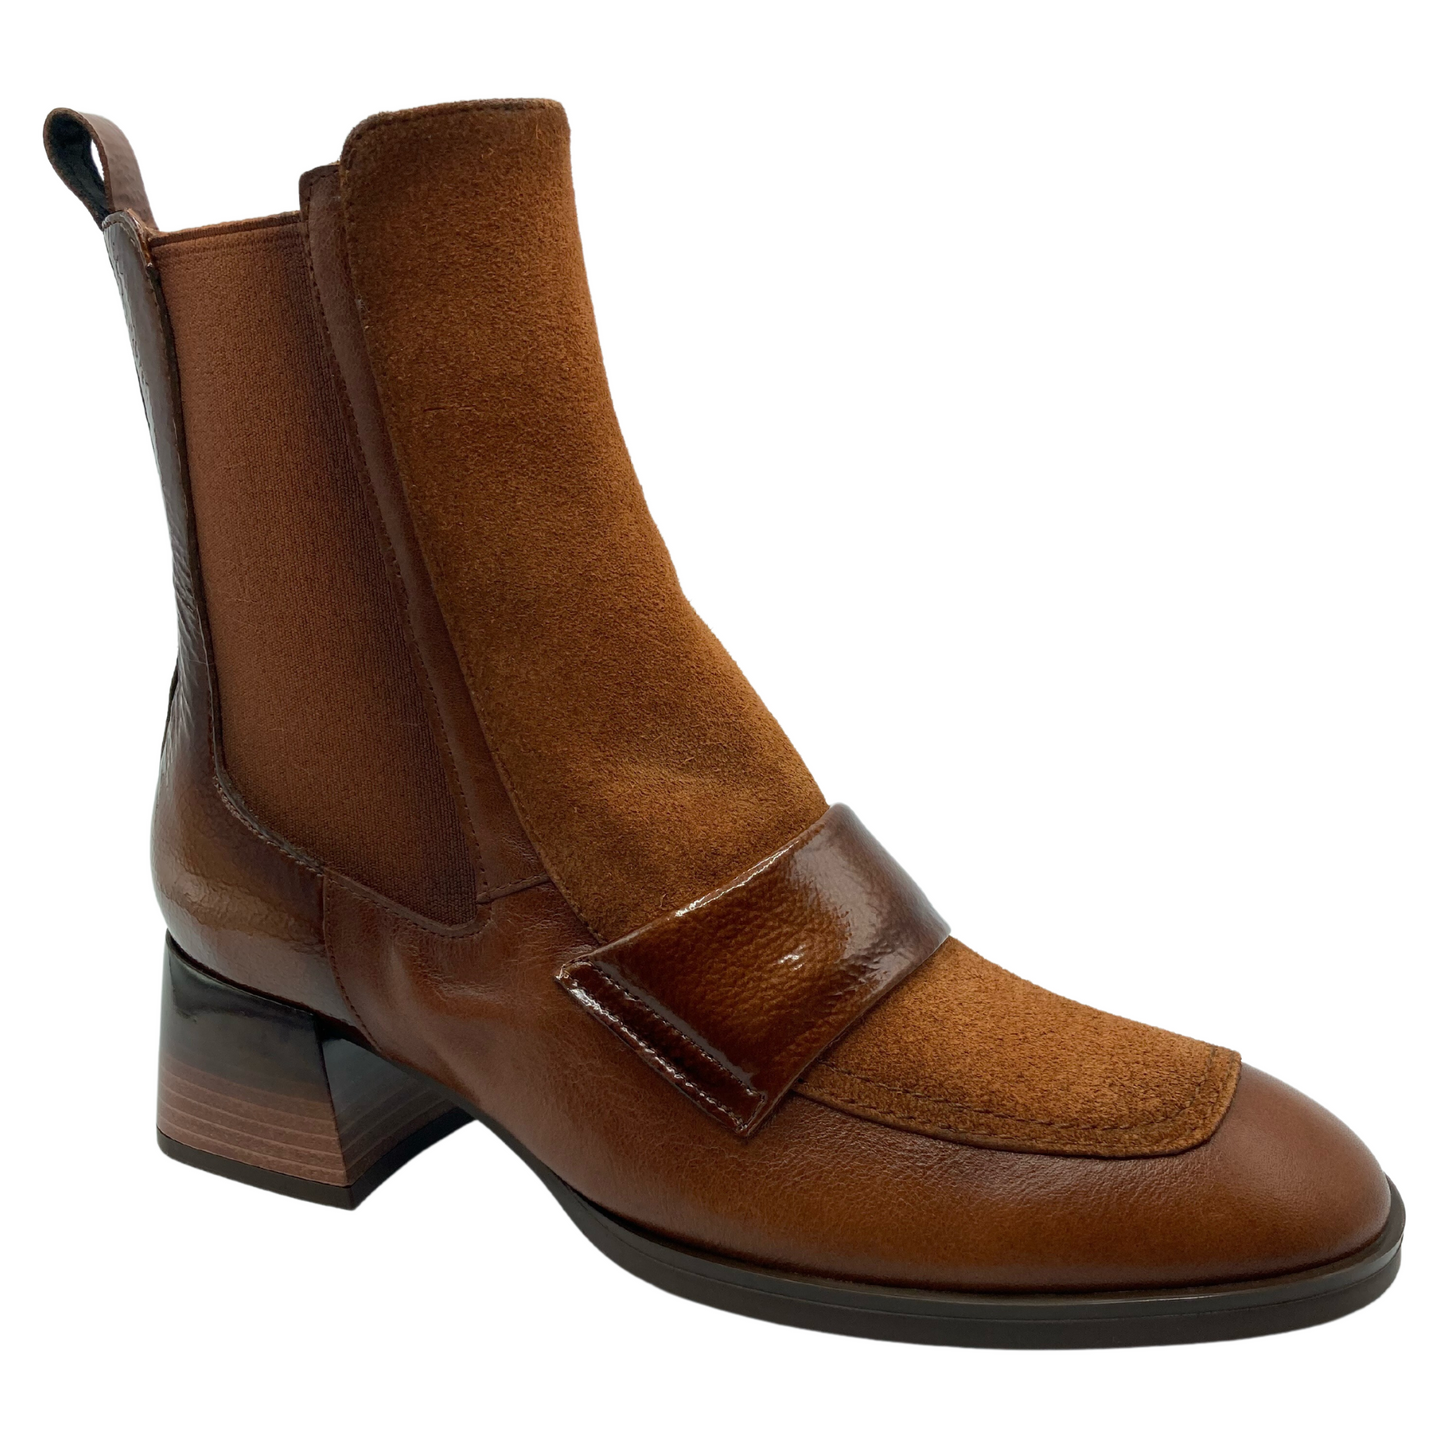 45 degree angled view of brown leather and suede short boot with block heel and elasticated side gore